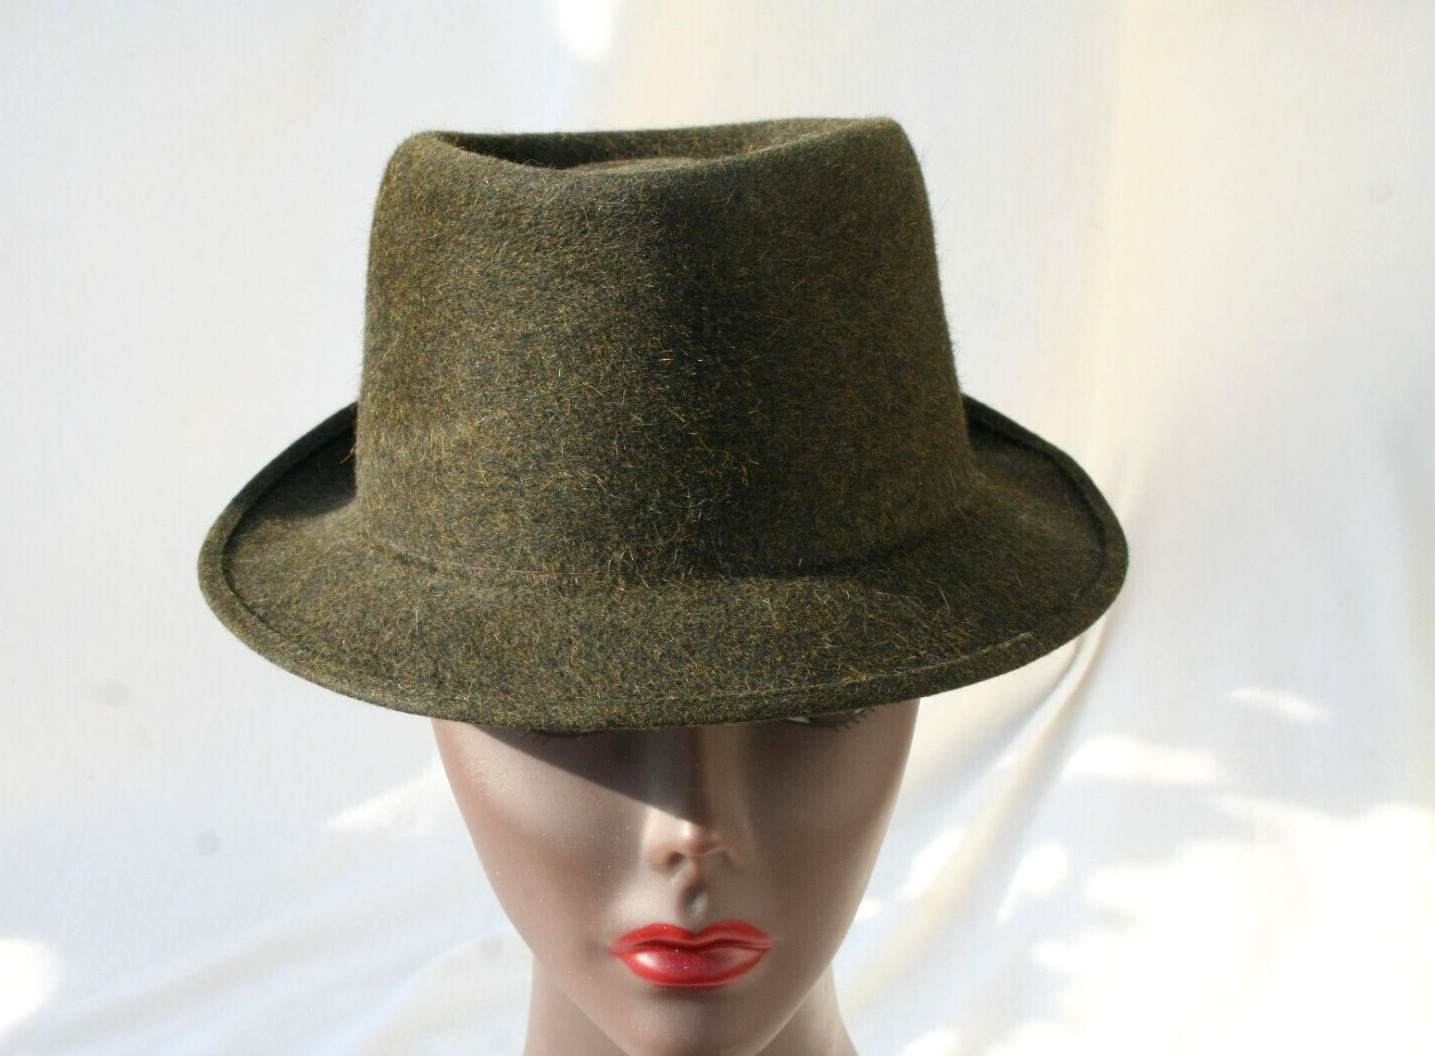 VINTAGE STETSON SPECIALTY FUR FELT FEDORA OVAL CROWN LIGHTWEIGHT HAT DICK TRACY